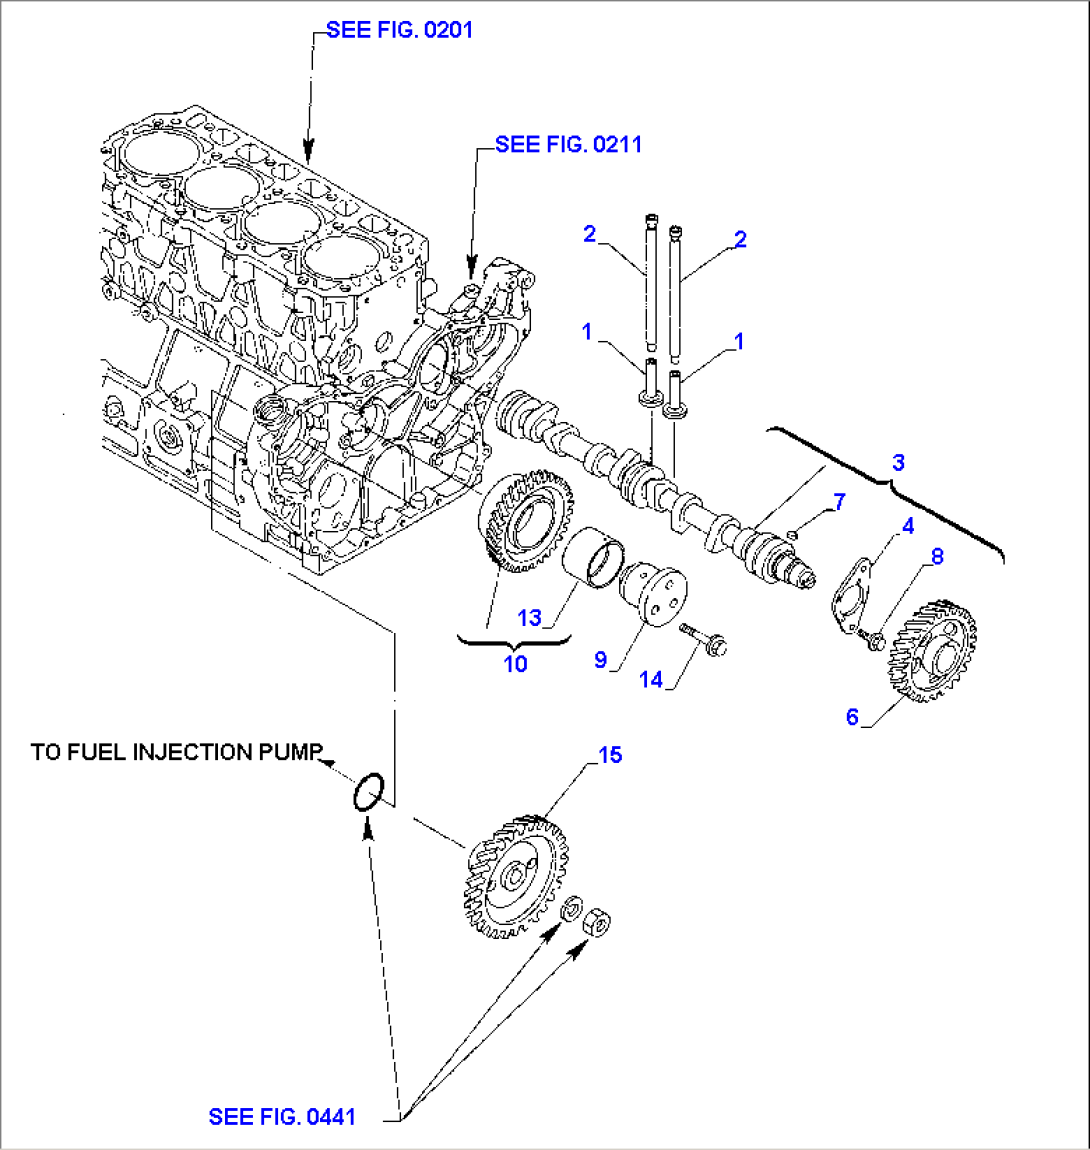 CAMSHAFT & DRIVING GEAR (ASPIRATED ENGINE)